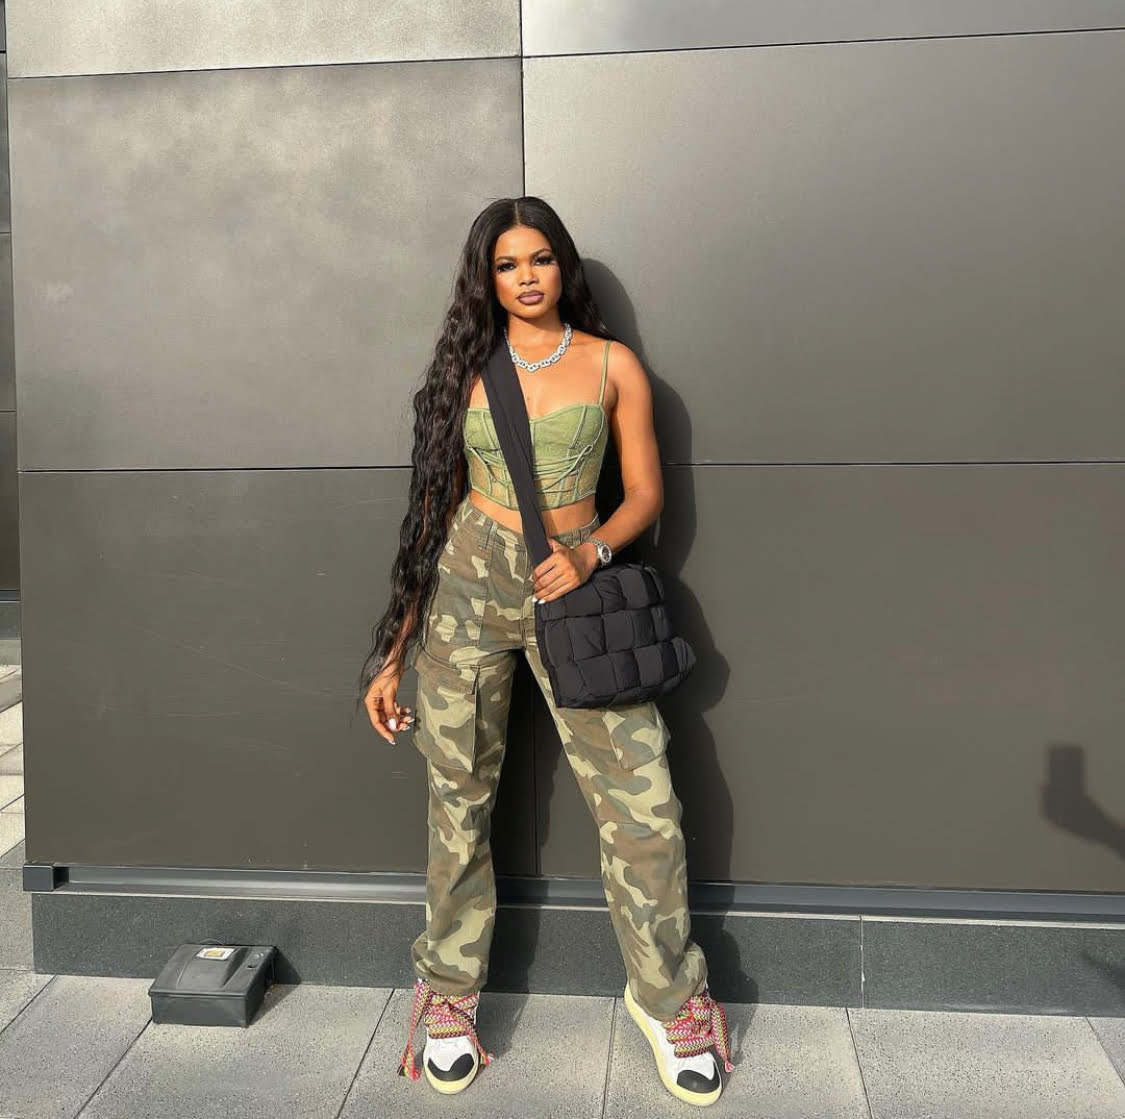 Boluwatife in army green combat trousers and a crop top.